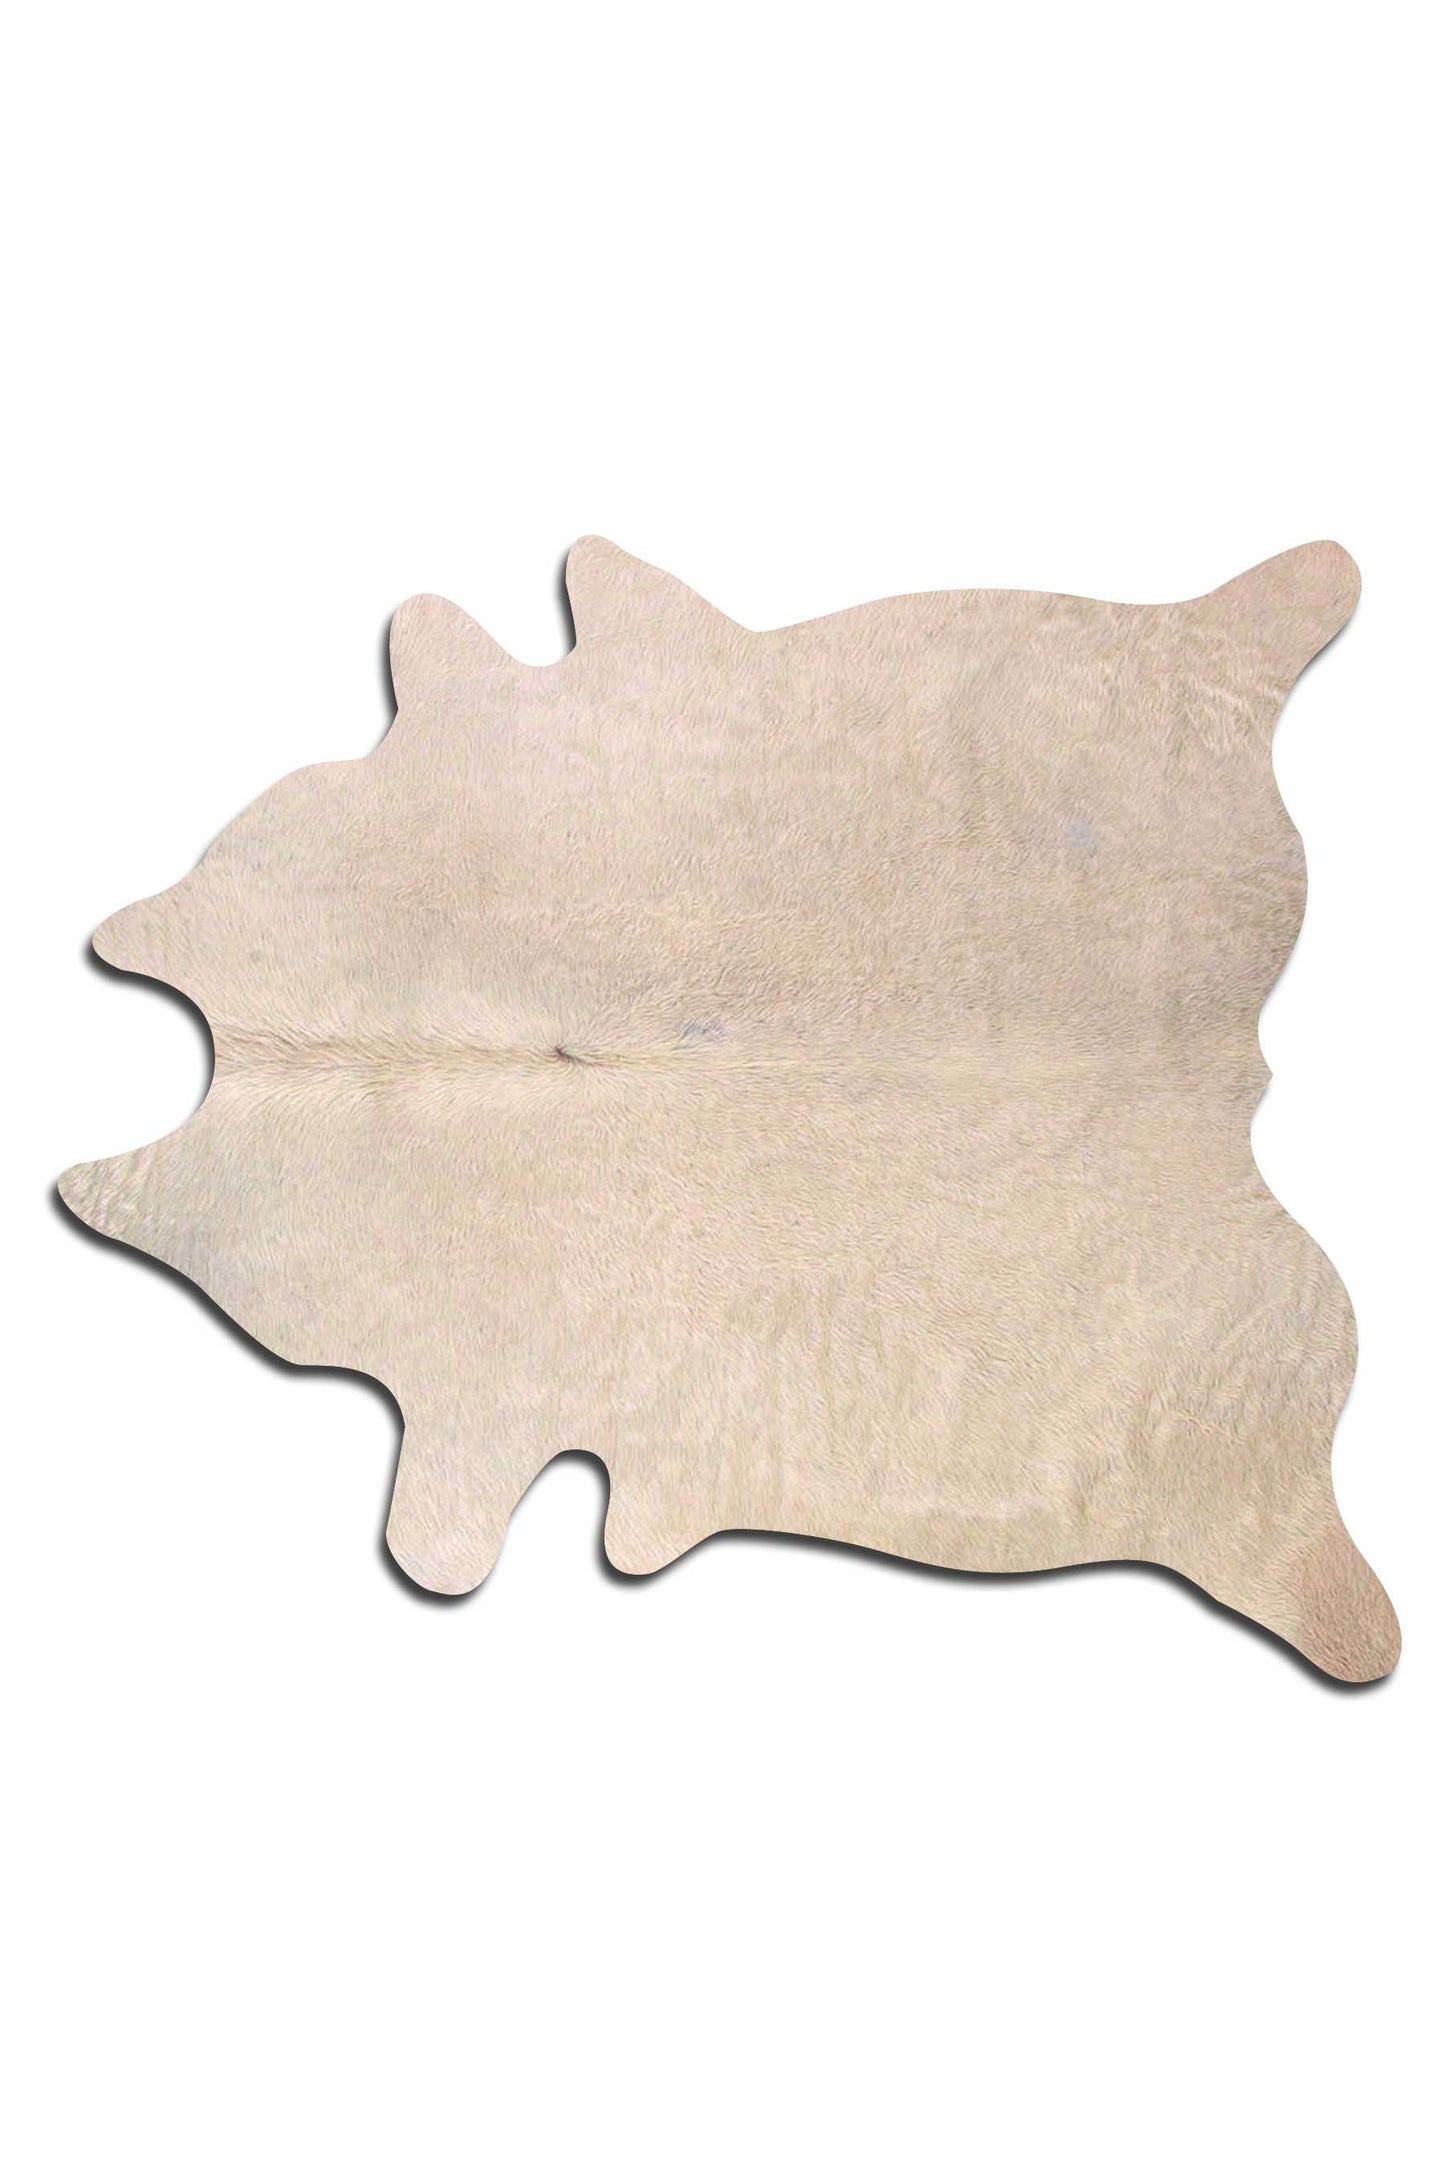 6' X 7' Off White Natural Cowhide Area Rug